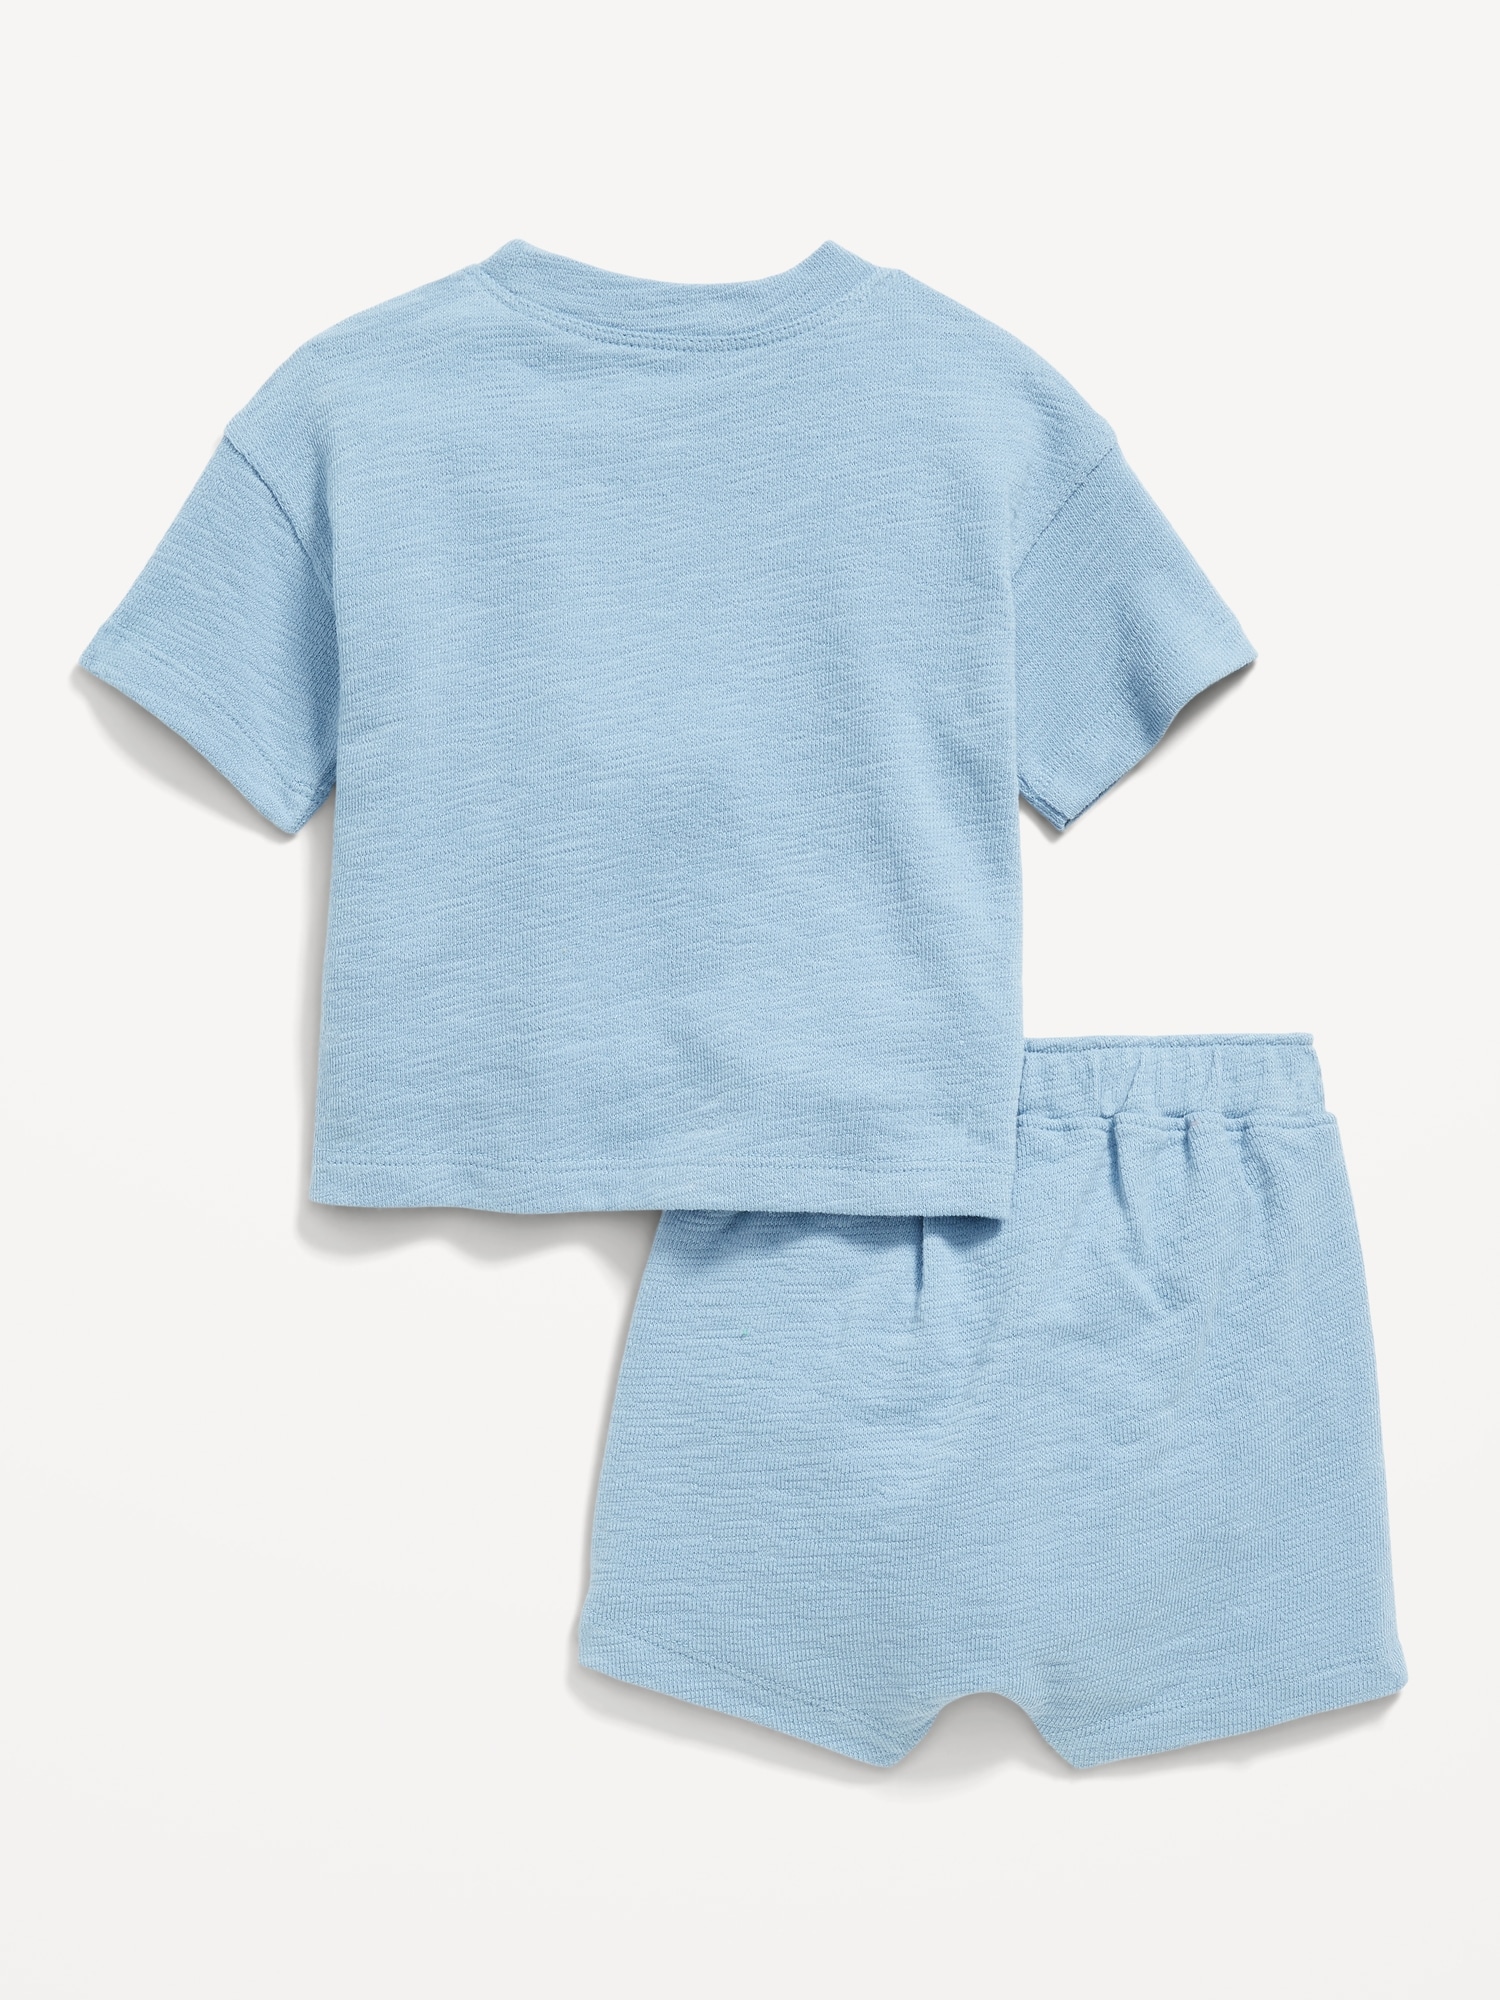 Short-Sleeve Pocket T-Shirt and Shorts Set for Baby | Old Navy